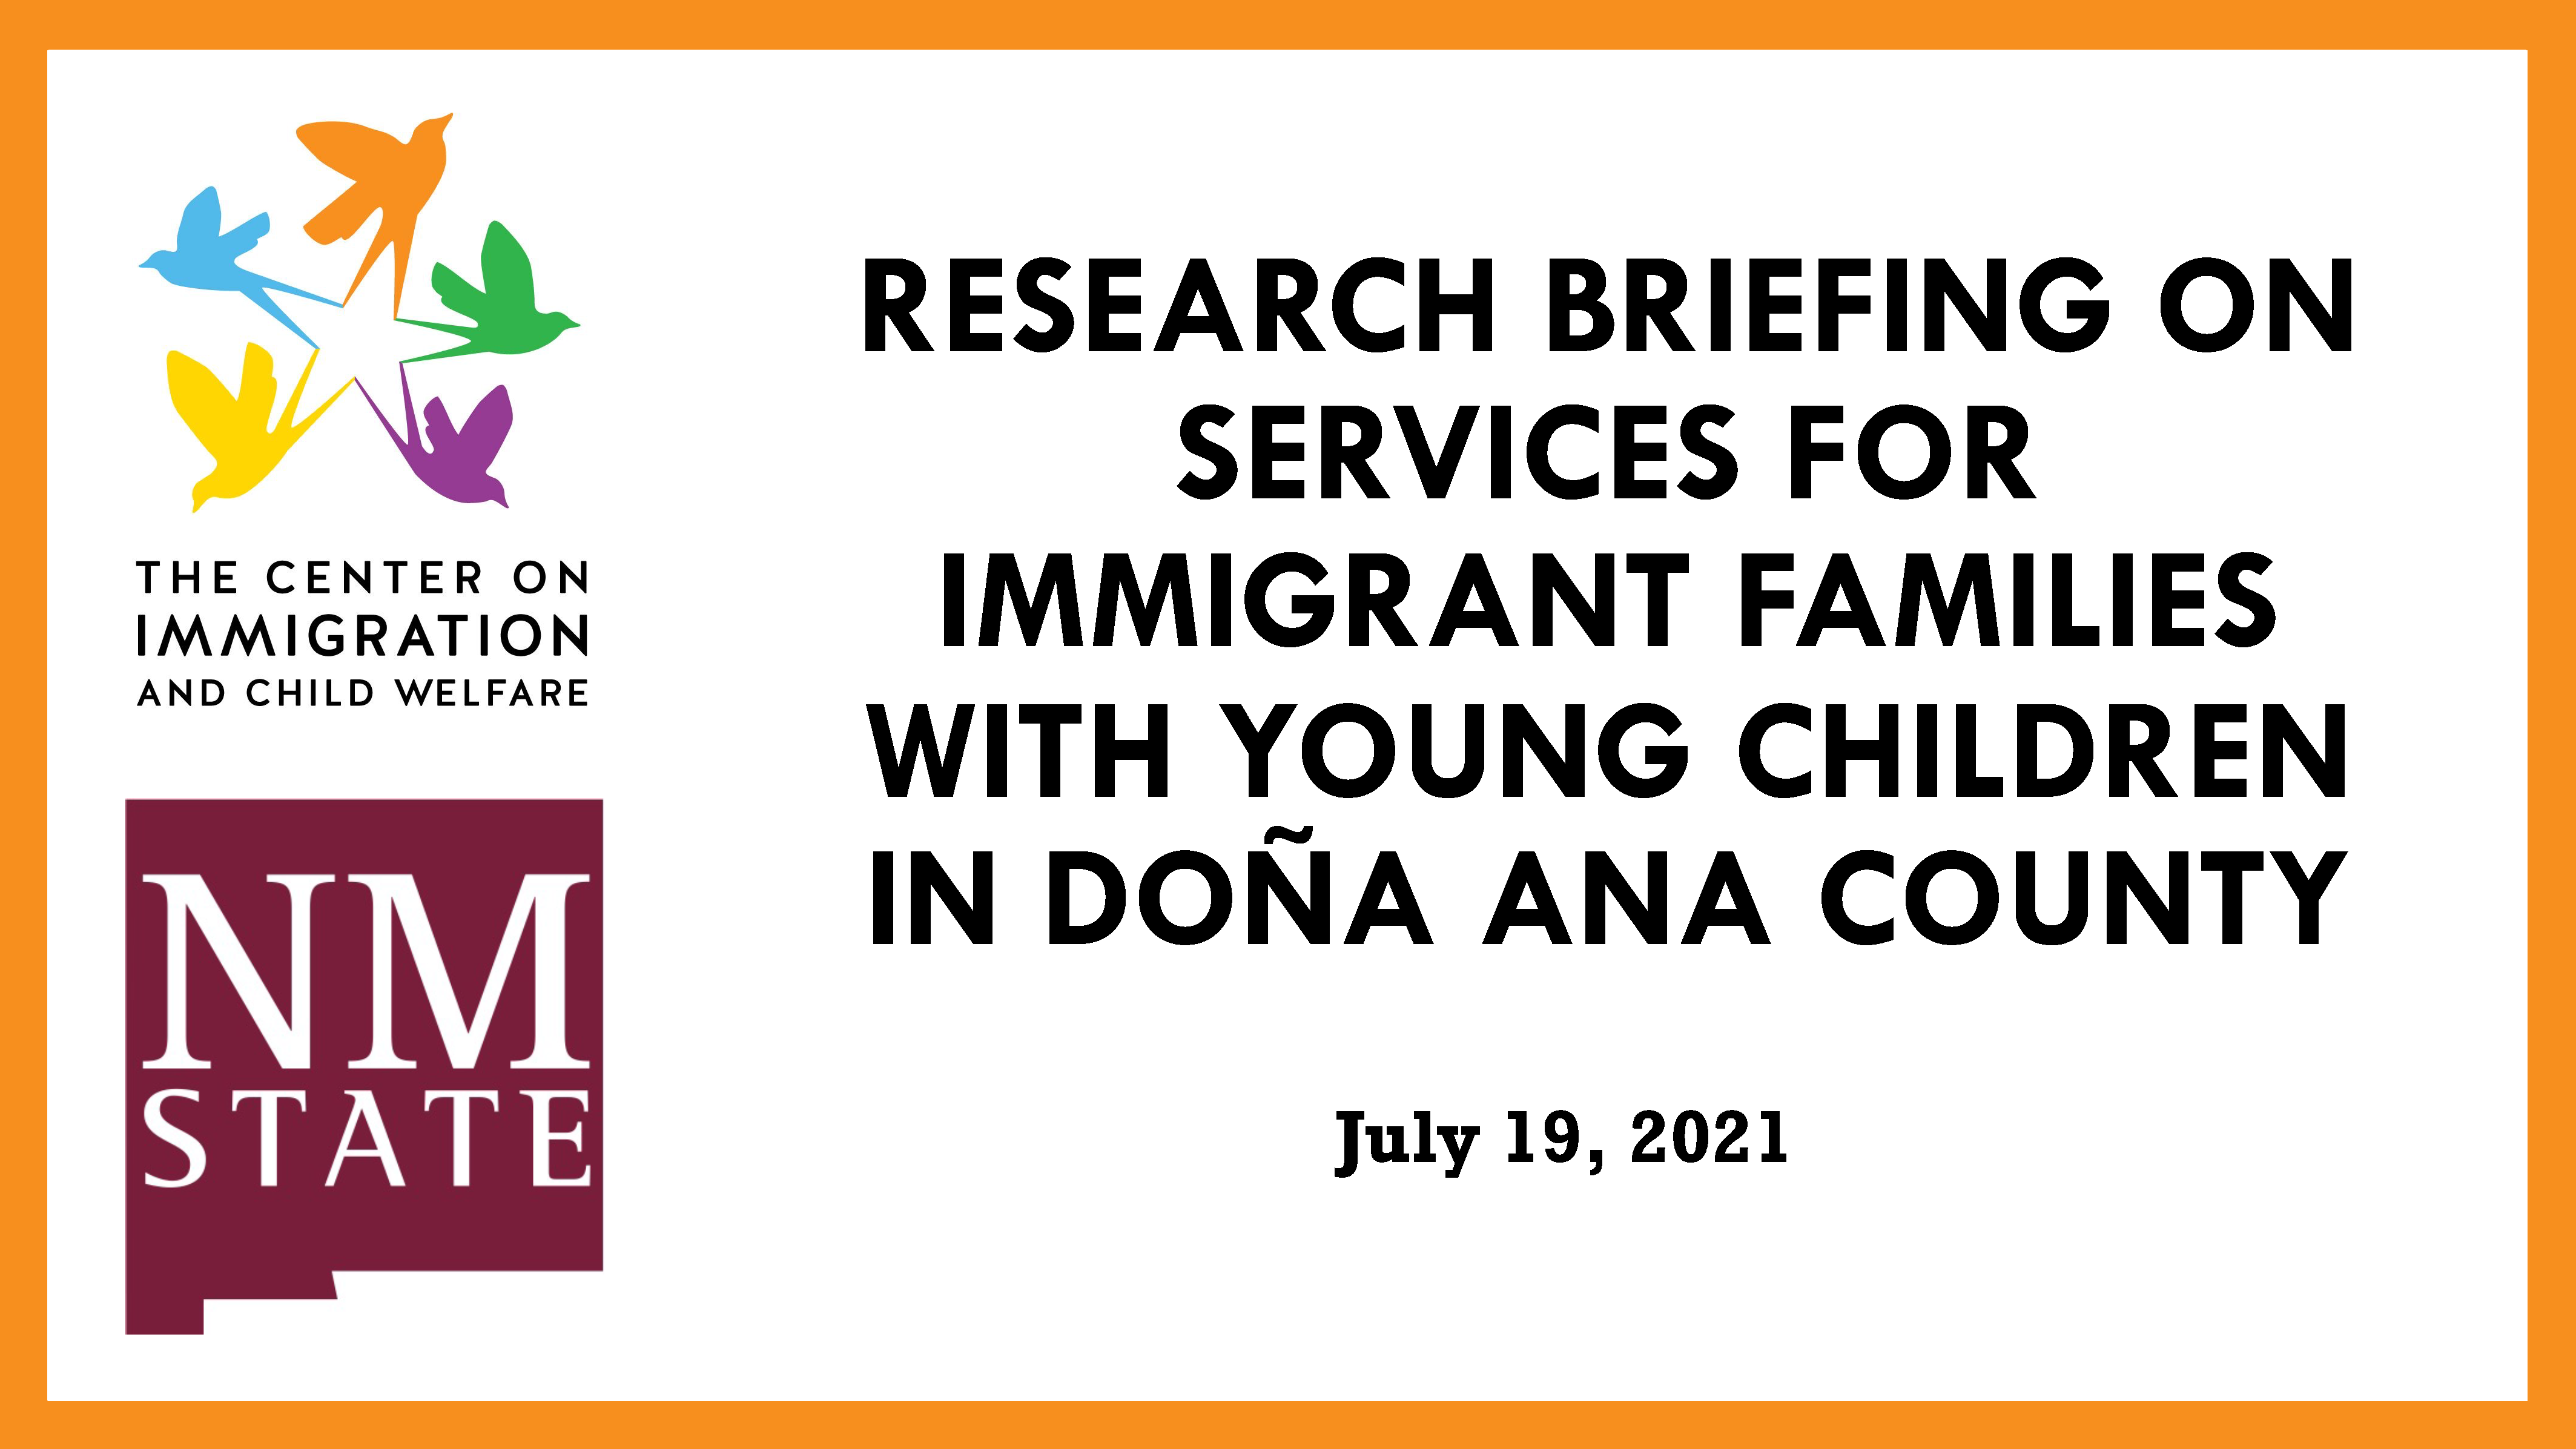 Research Brief on Services for Immigrant Families with Young Children